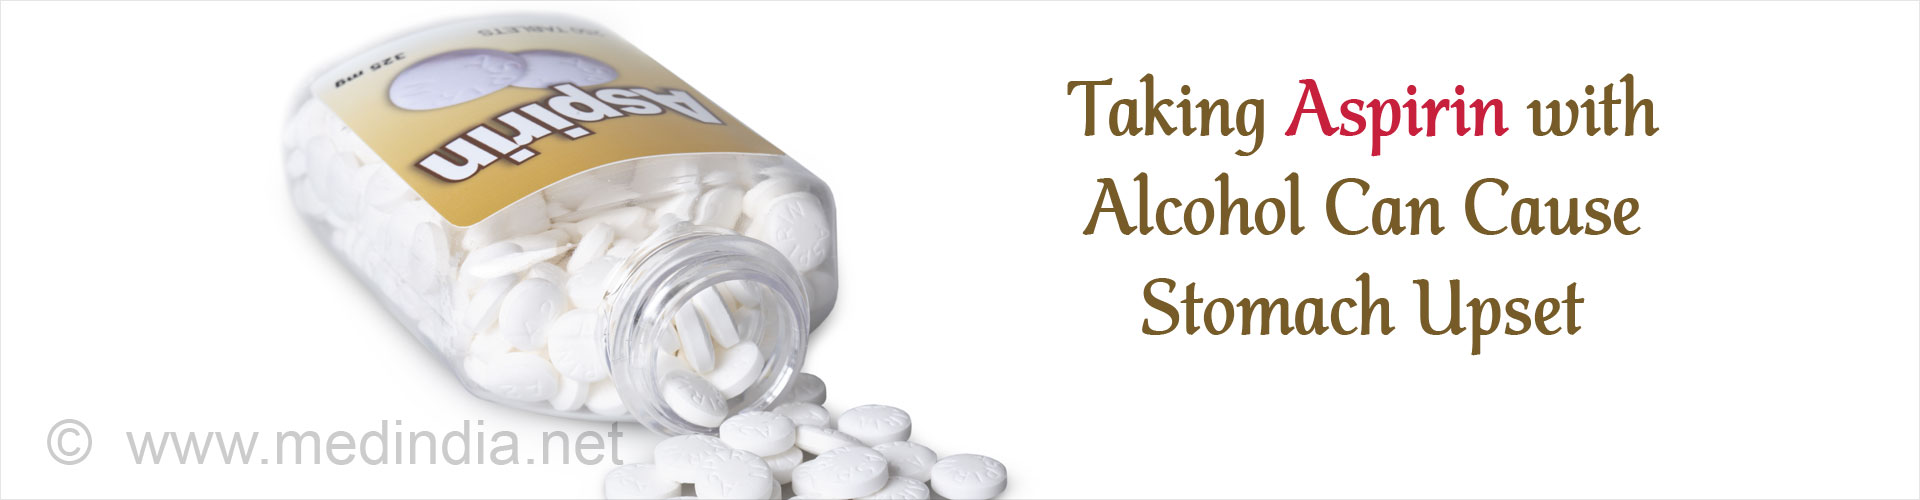 Taking aspirin with alcohol can cause stomach upset
